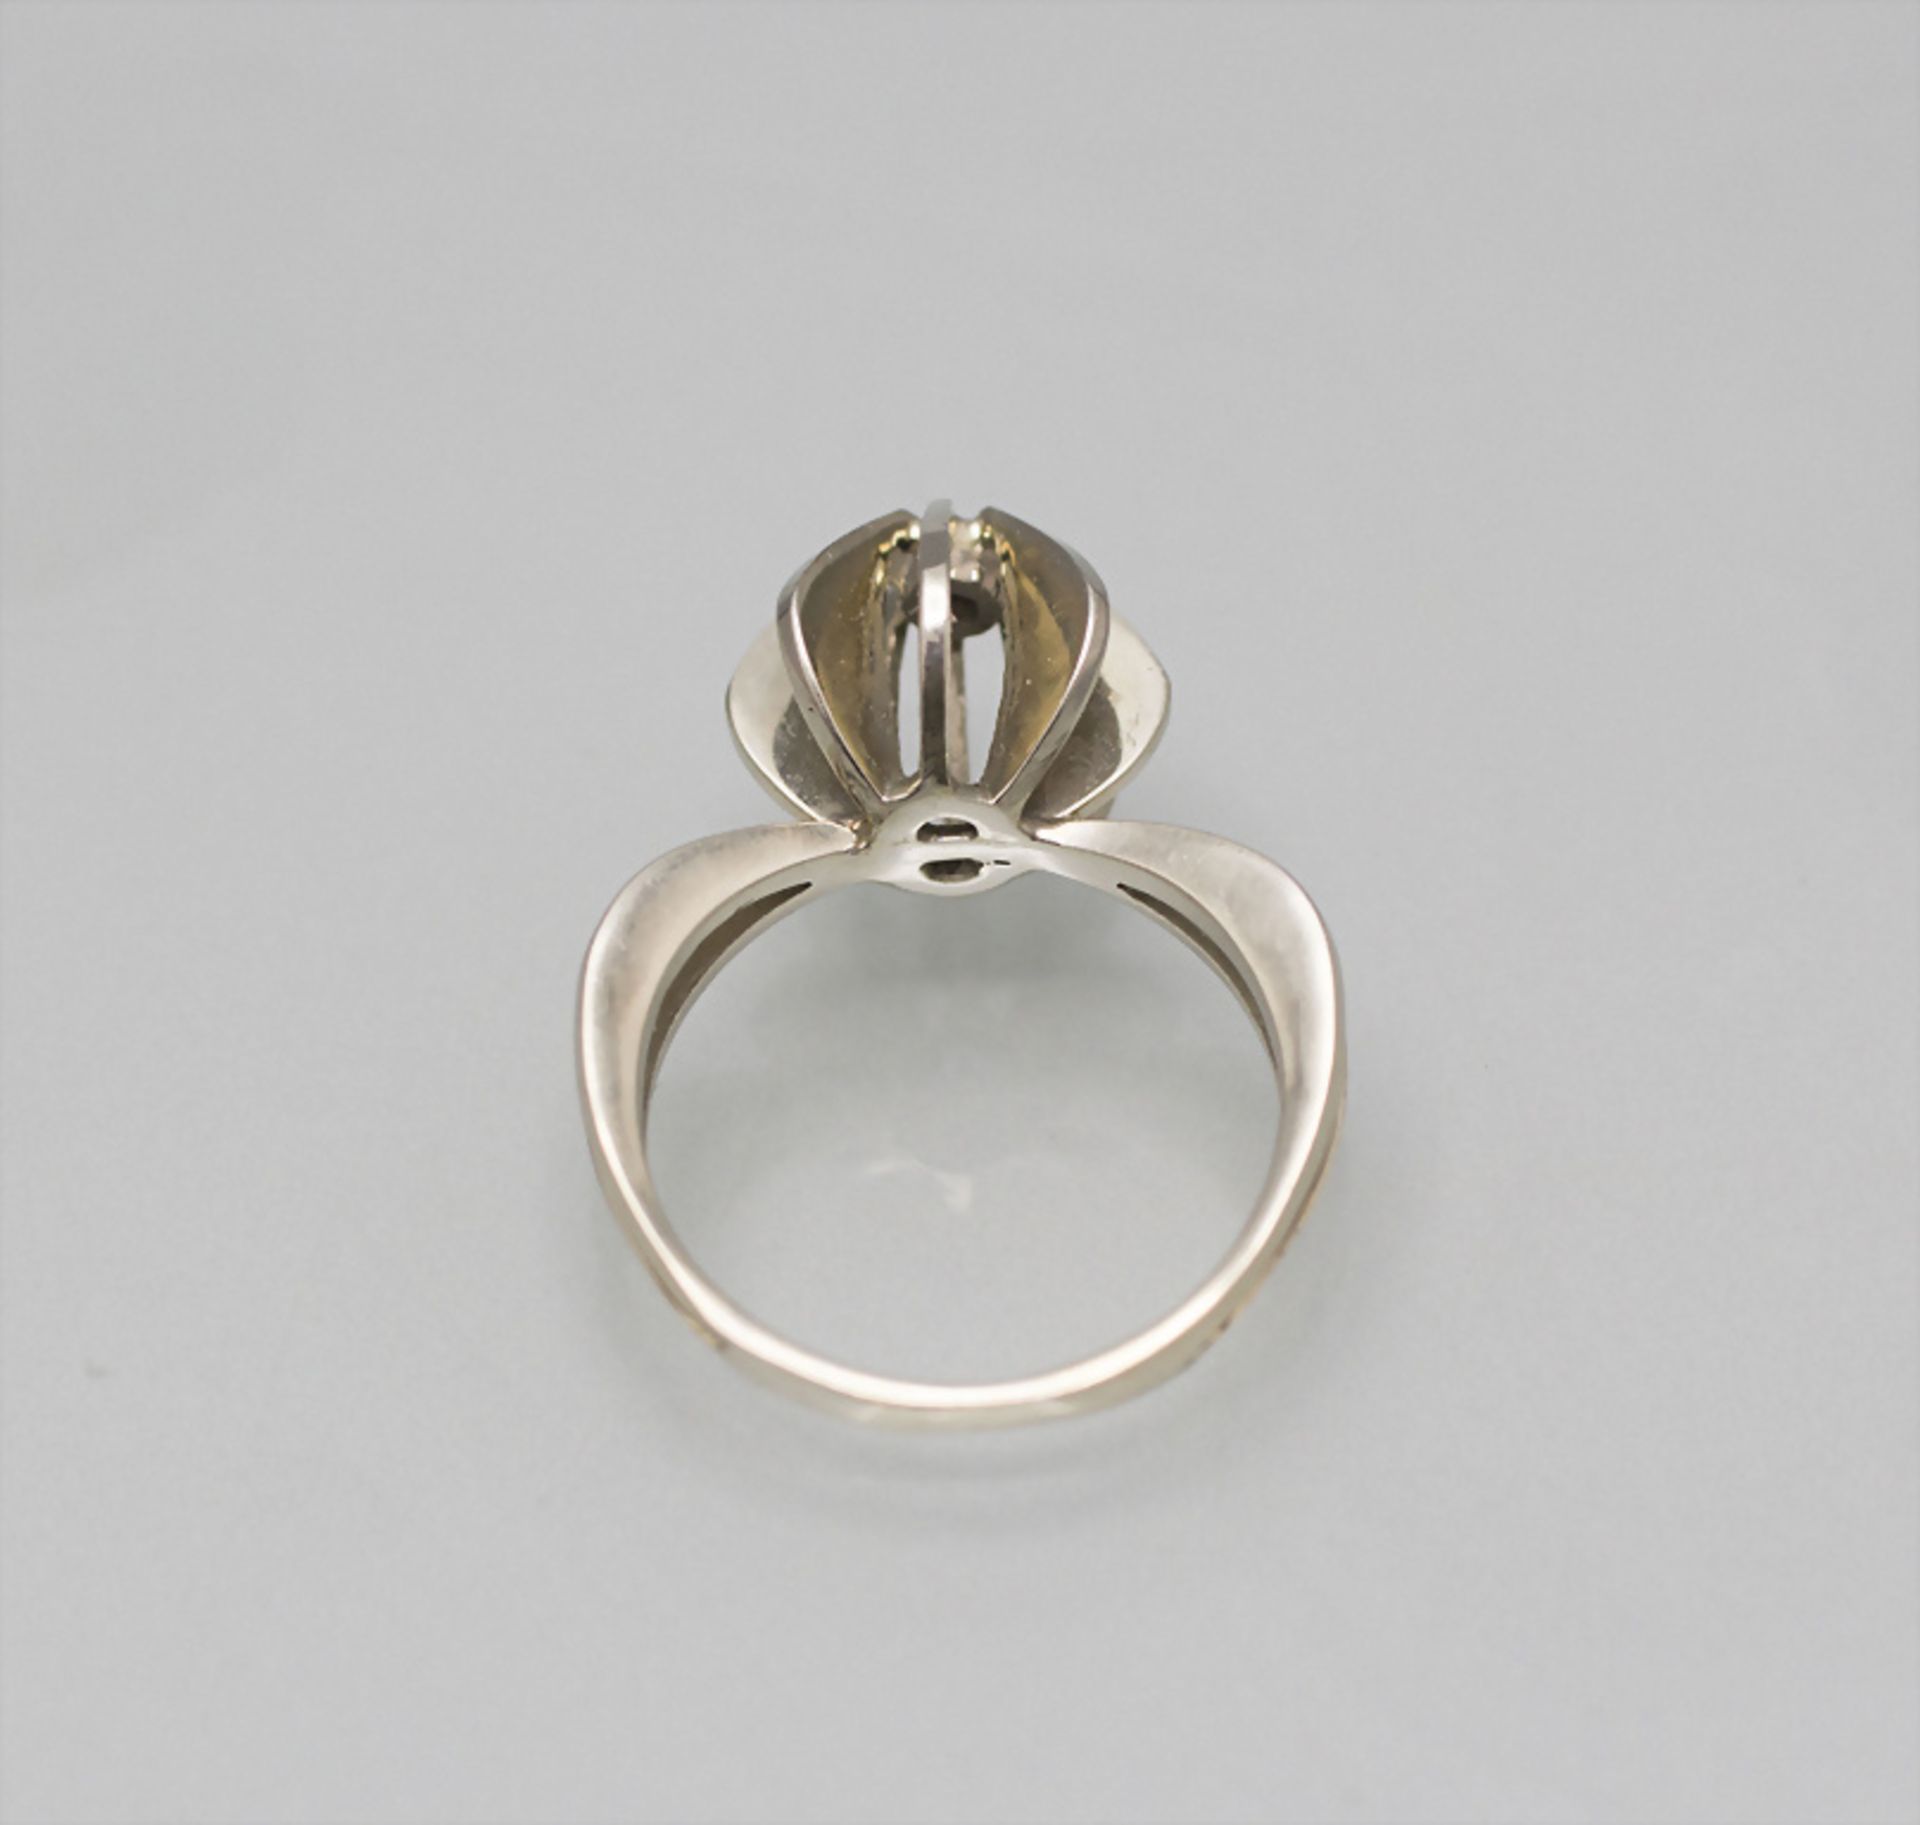 Damenring mit Brillant / A ladies 18 ct gold ring with diamond - Image 4 of 4